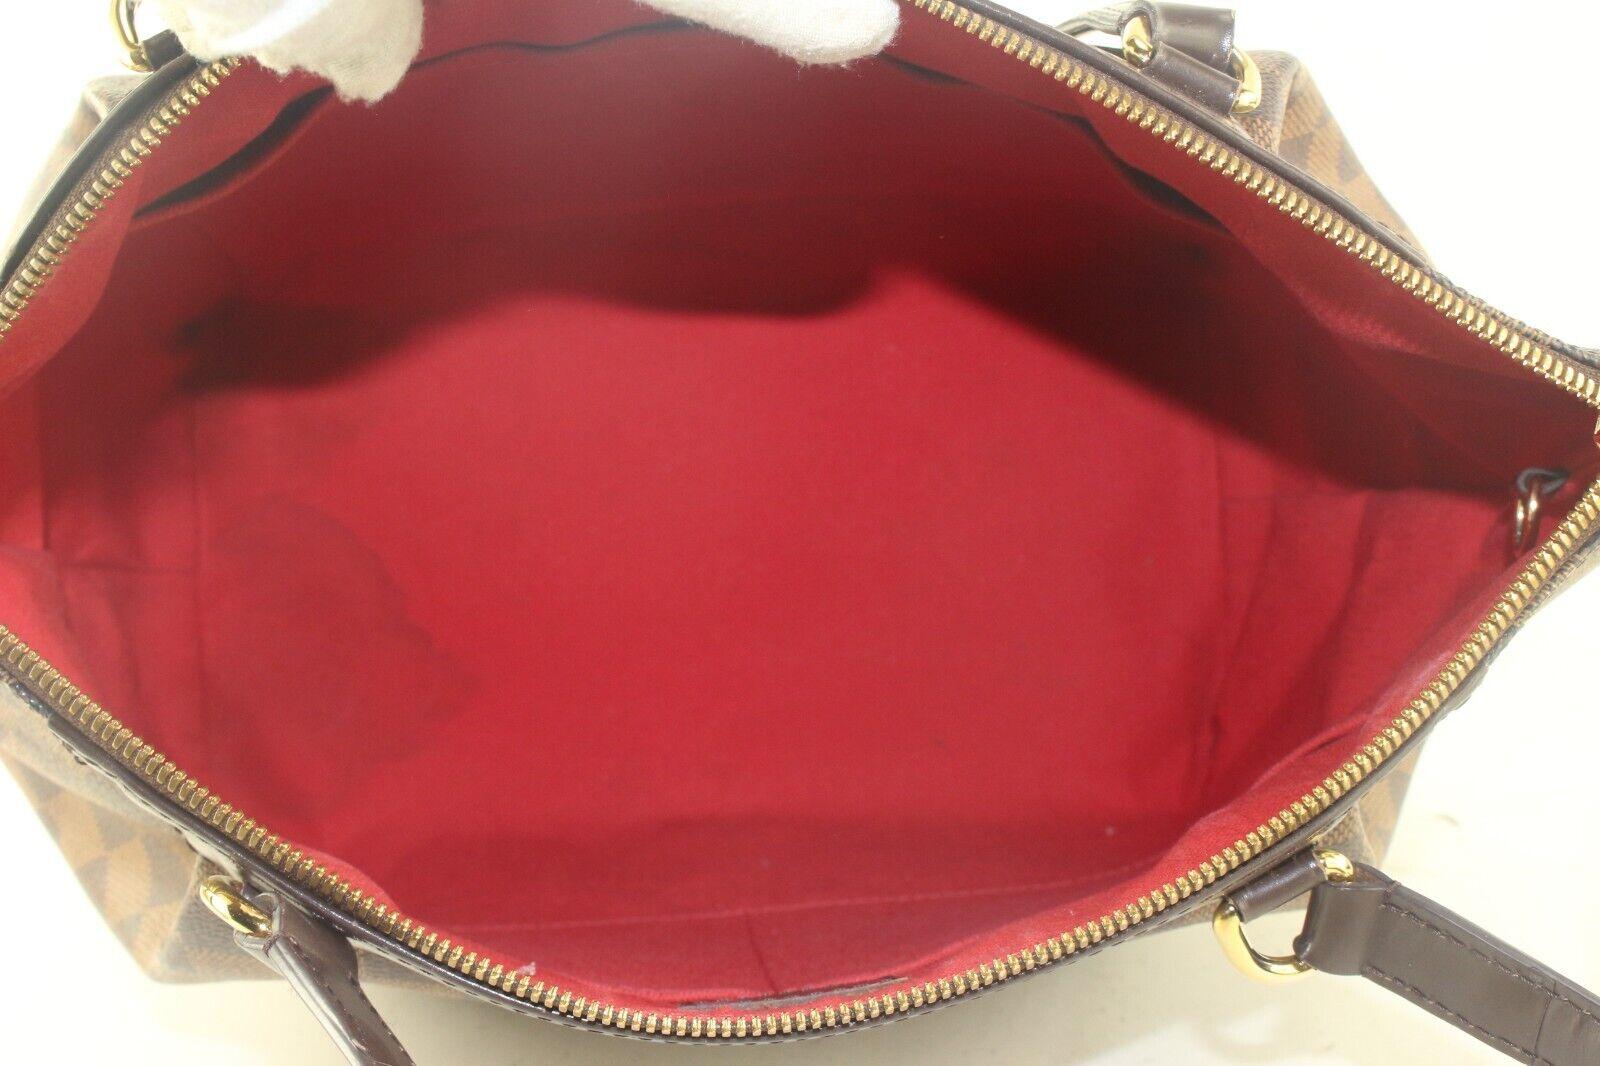 Louis Vuitton Damiier Ebene Westminster GM Zip Tote Shoulder Bag 3LV830K In Good Condition For Sale In Dix hills, NY